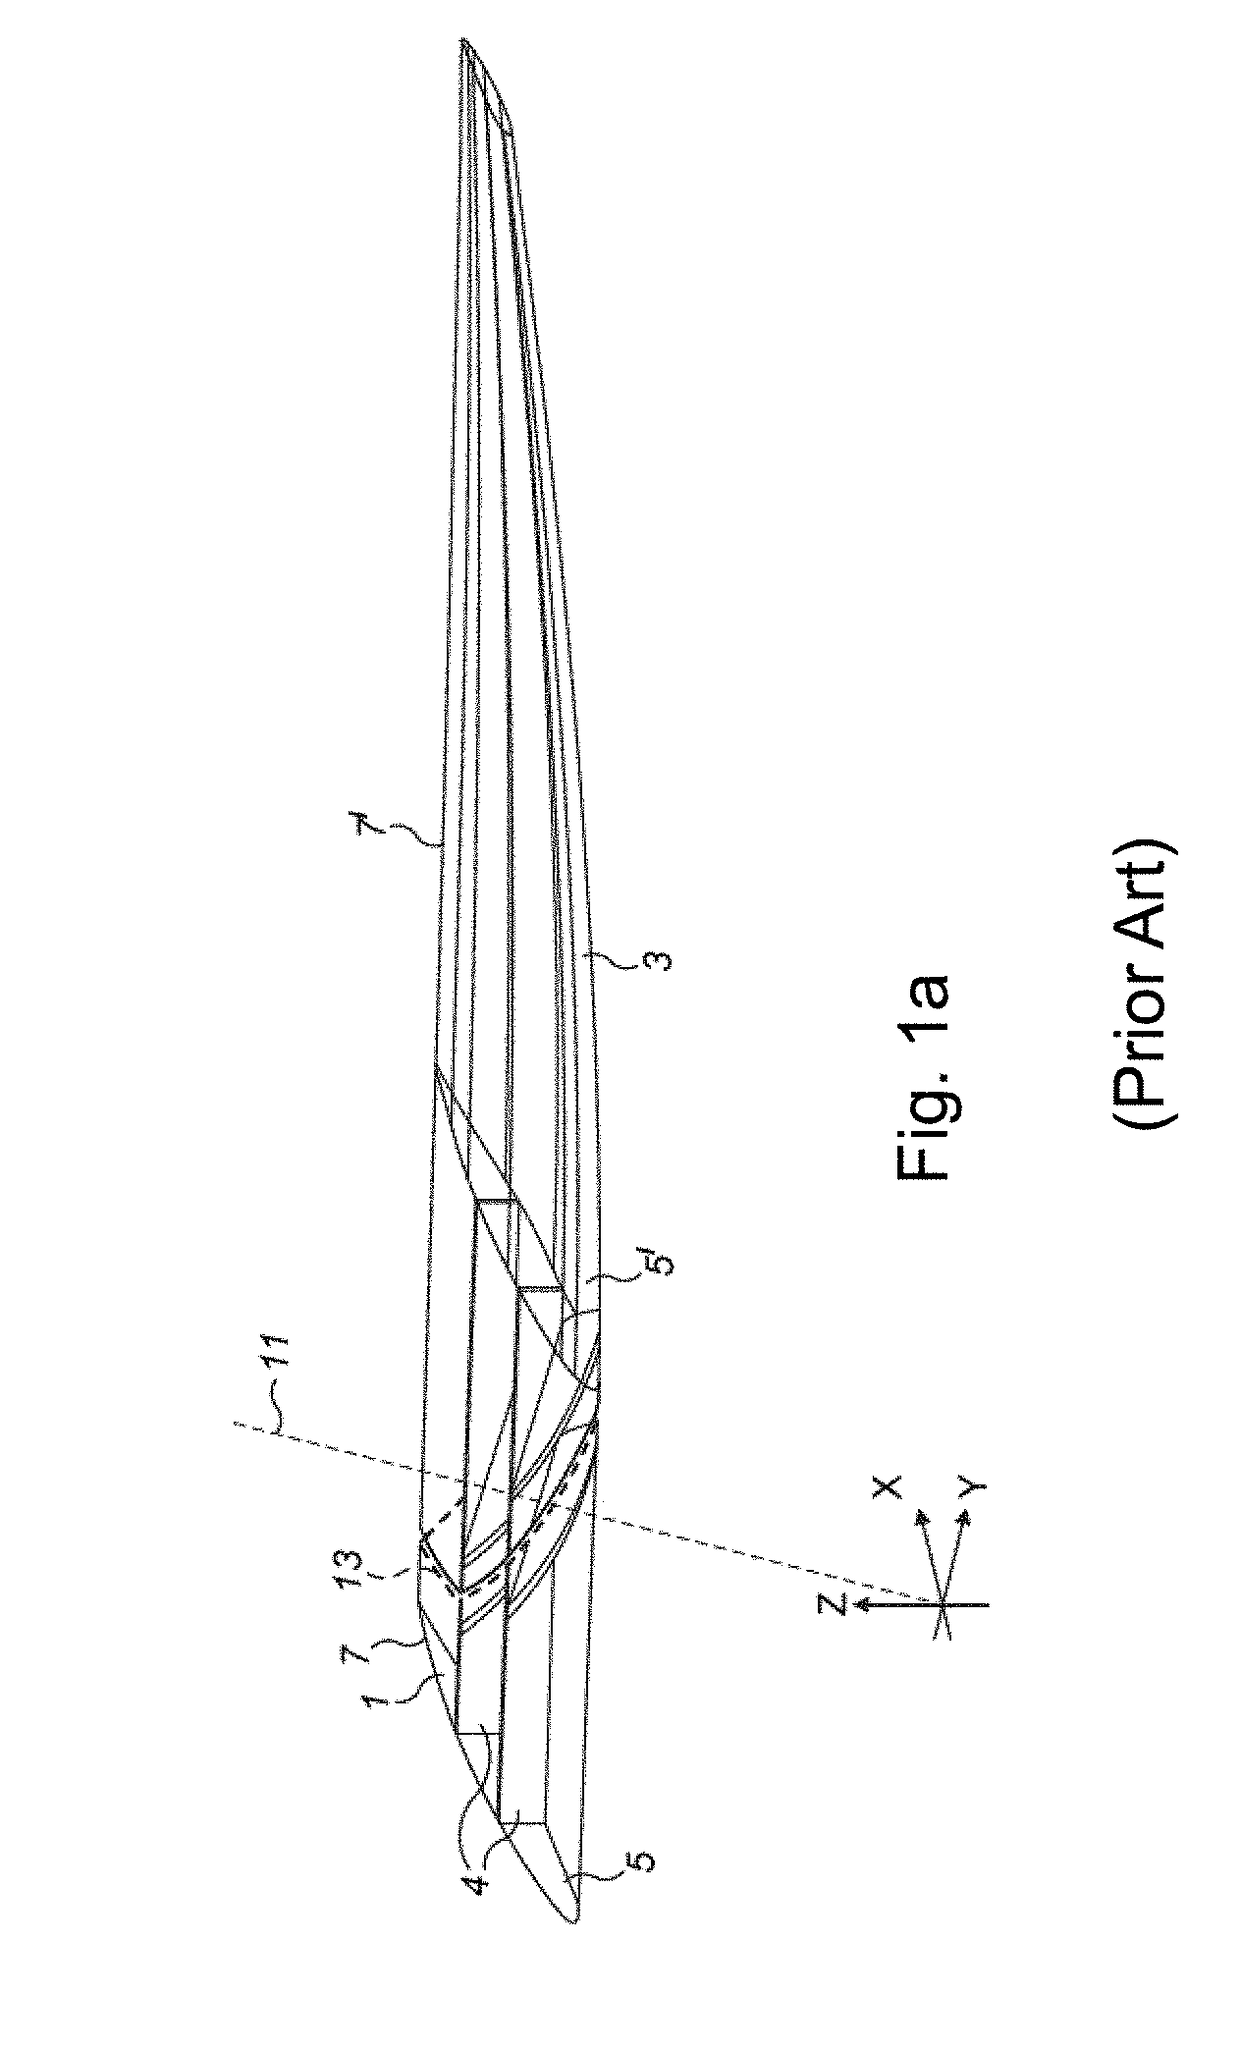 Interface between an outer end of a wing and a moveable wing tip device